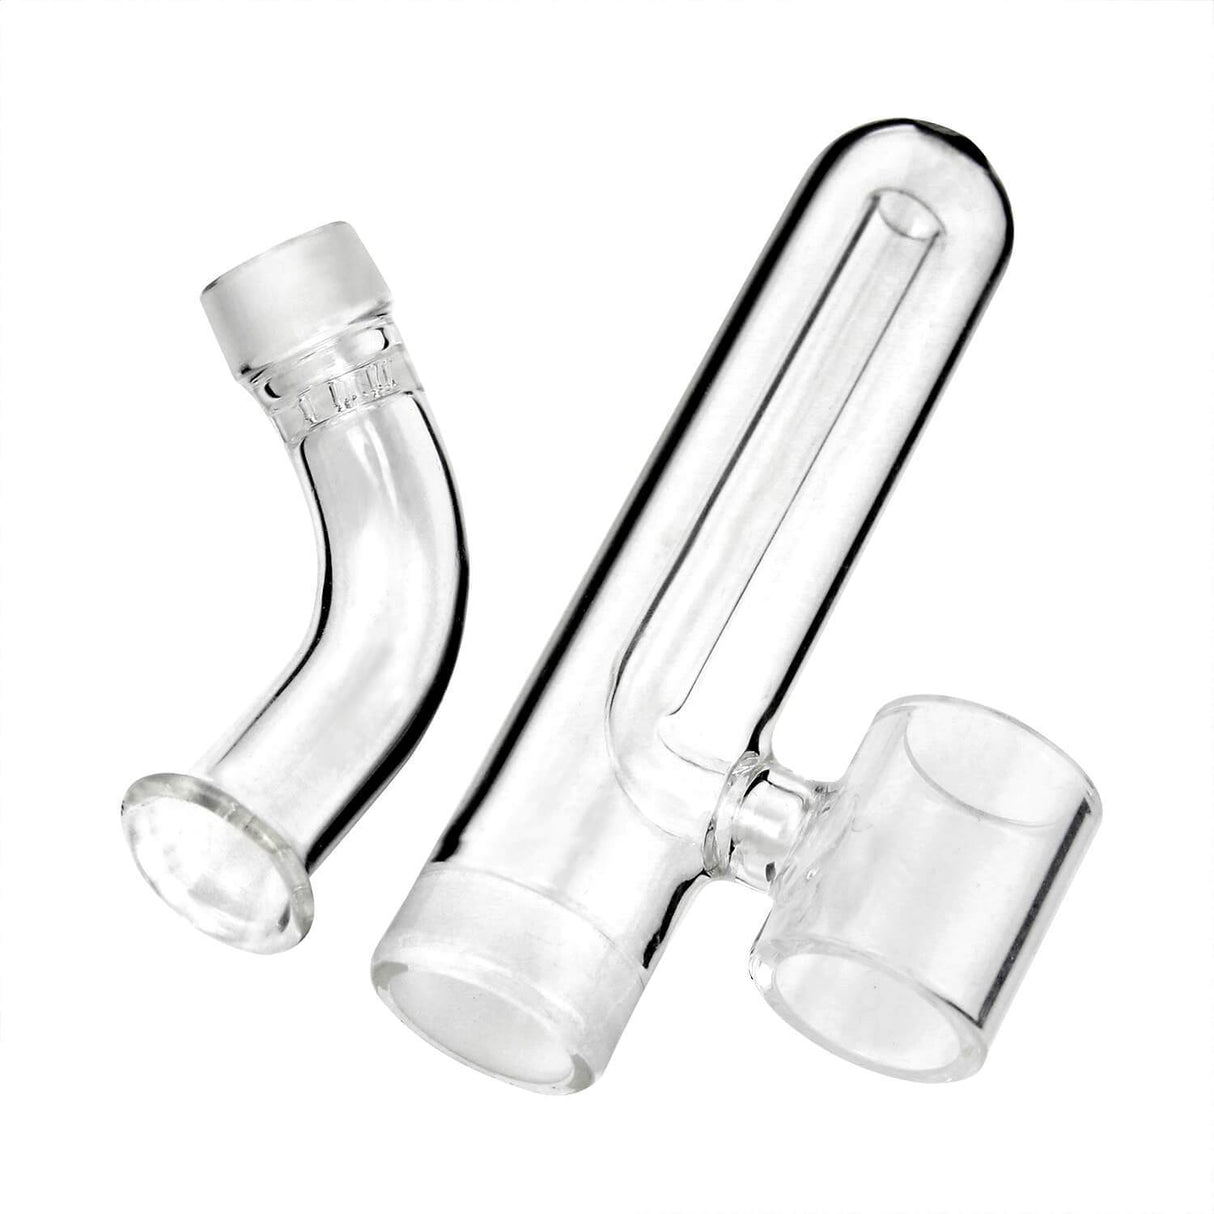 PILOT DIARY Glass Attachment for ECUBE, Clear Glass, Angled and Straight Tubes